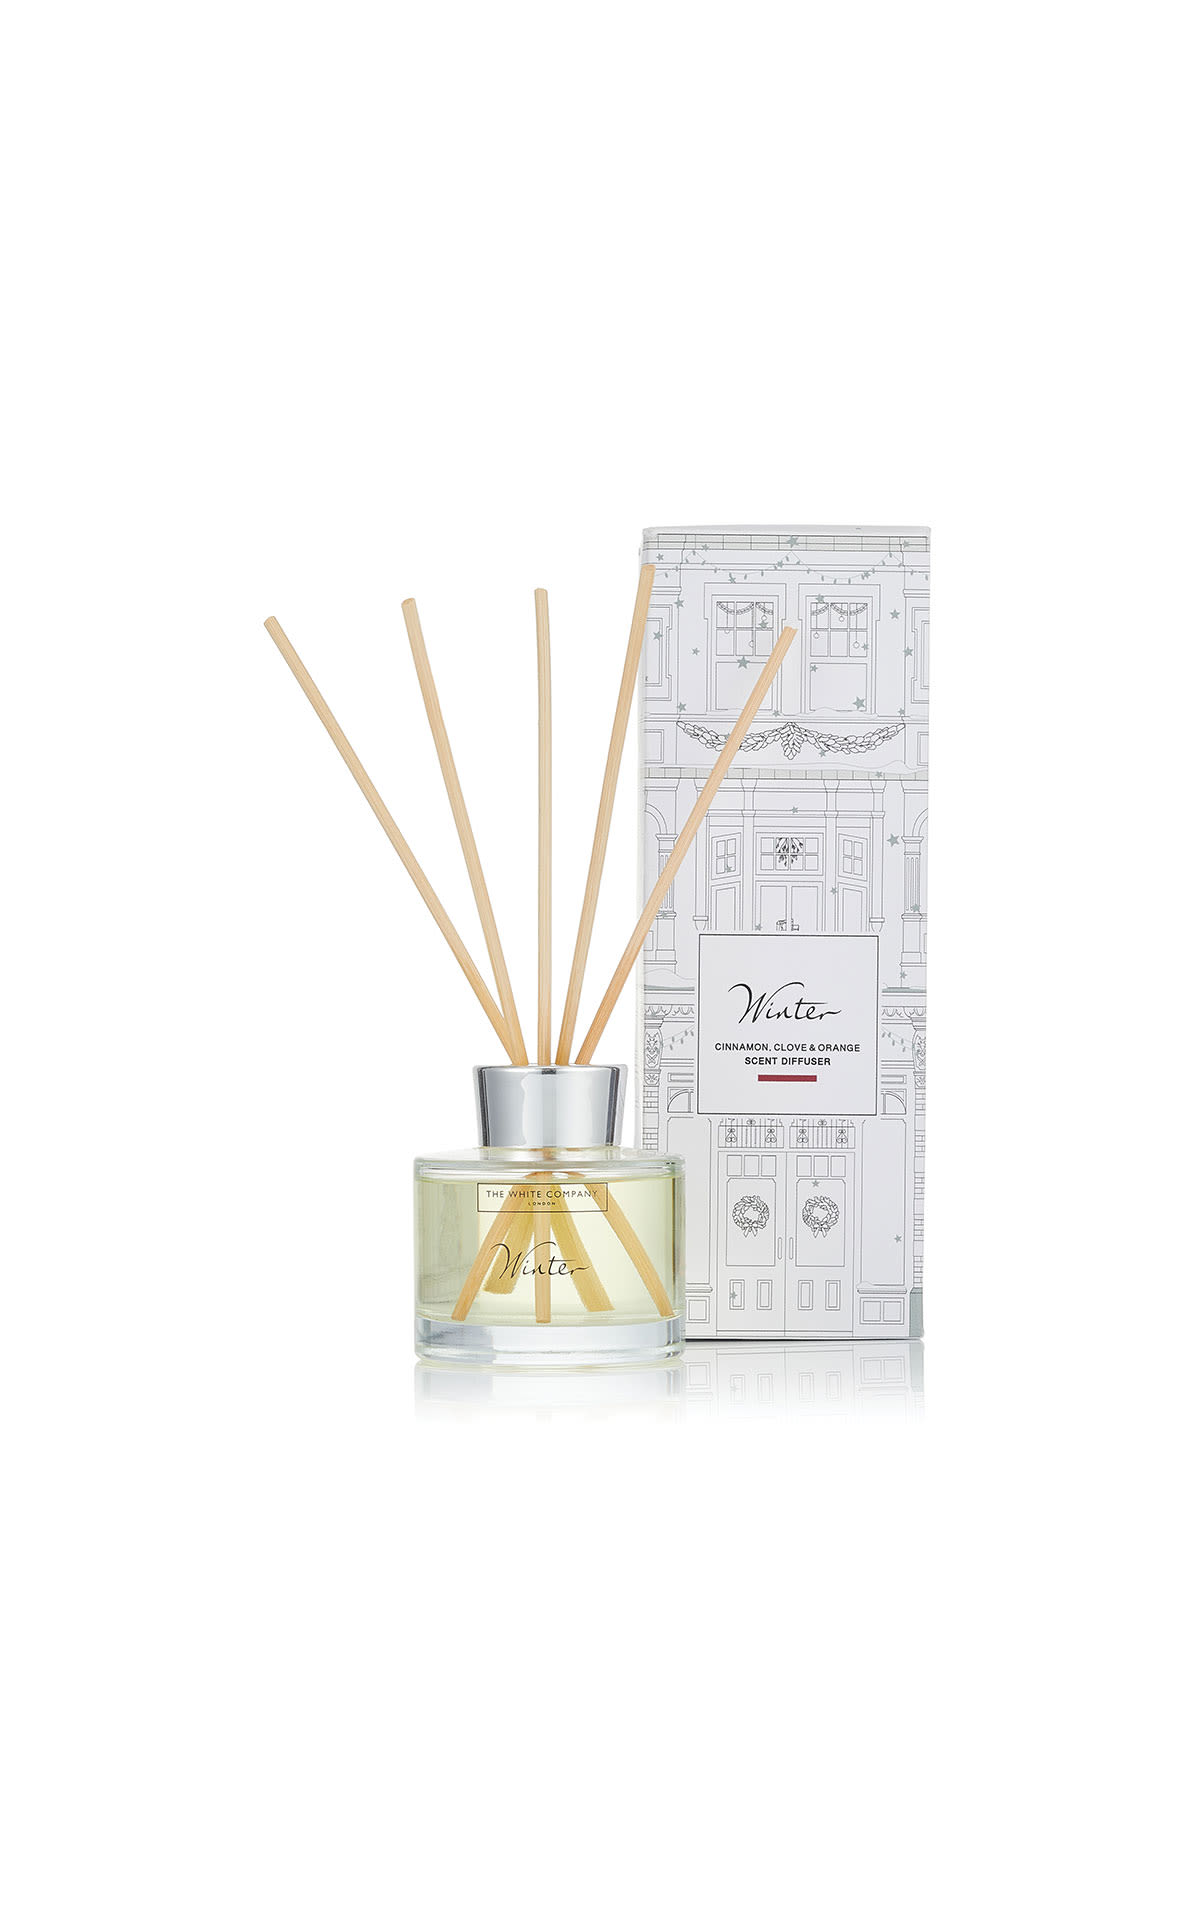 The White Company  Winter diffuser from Bicester Village